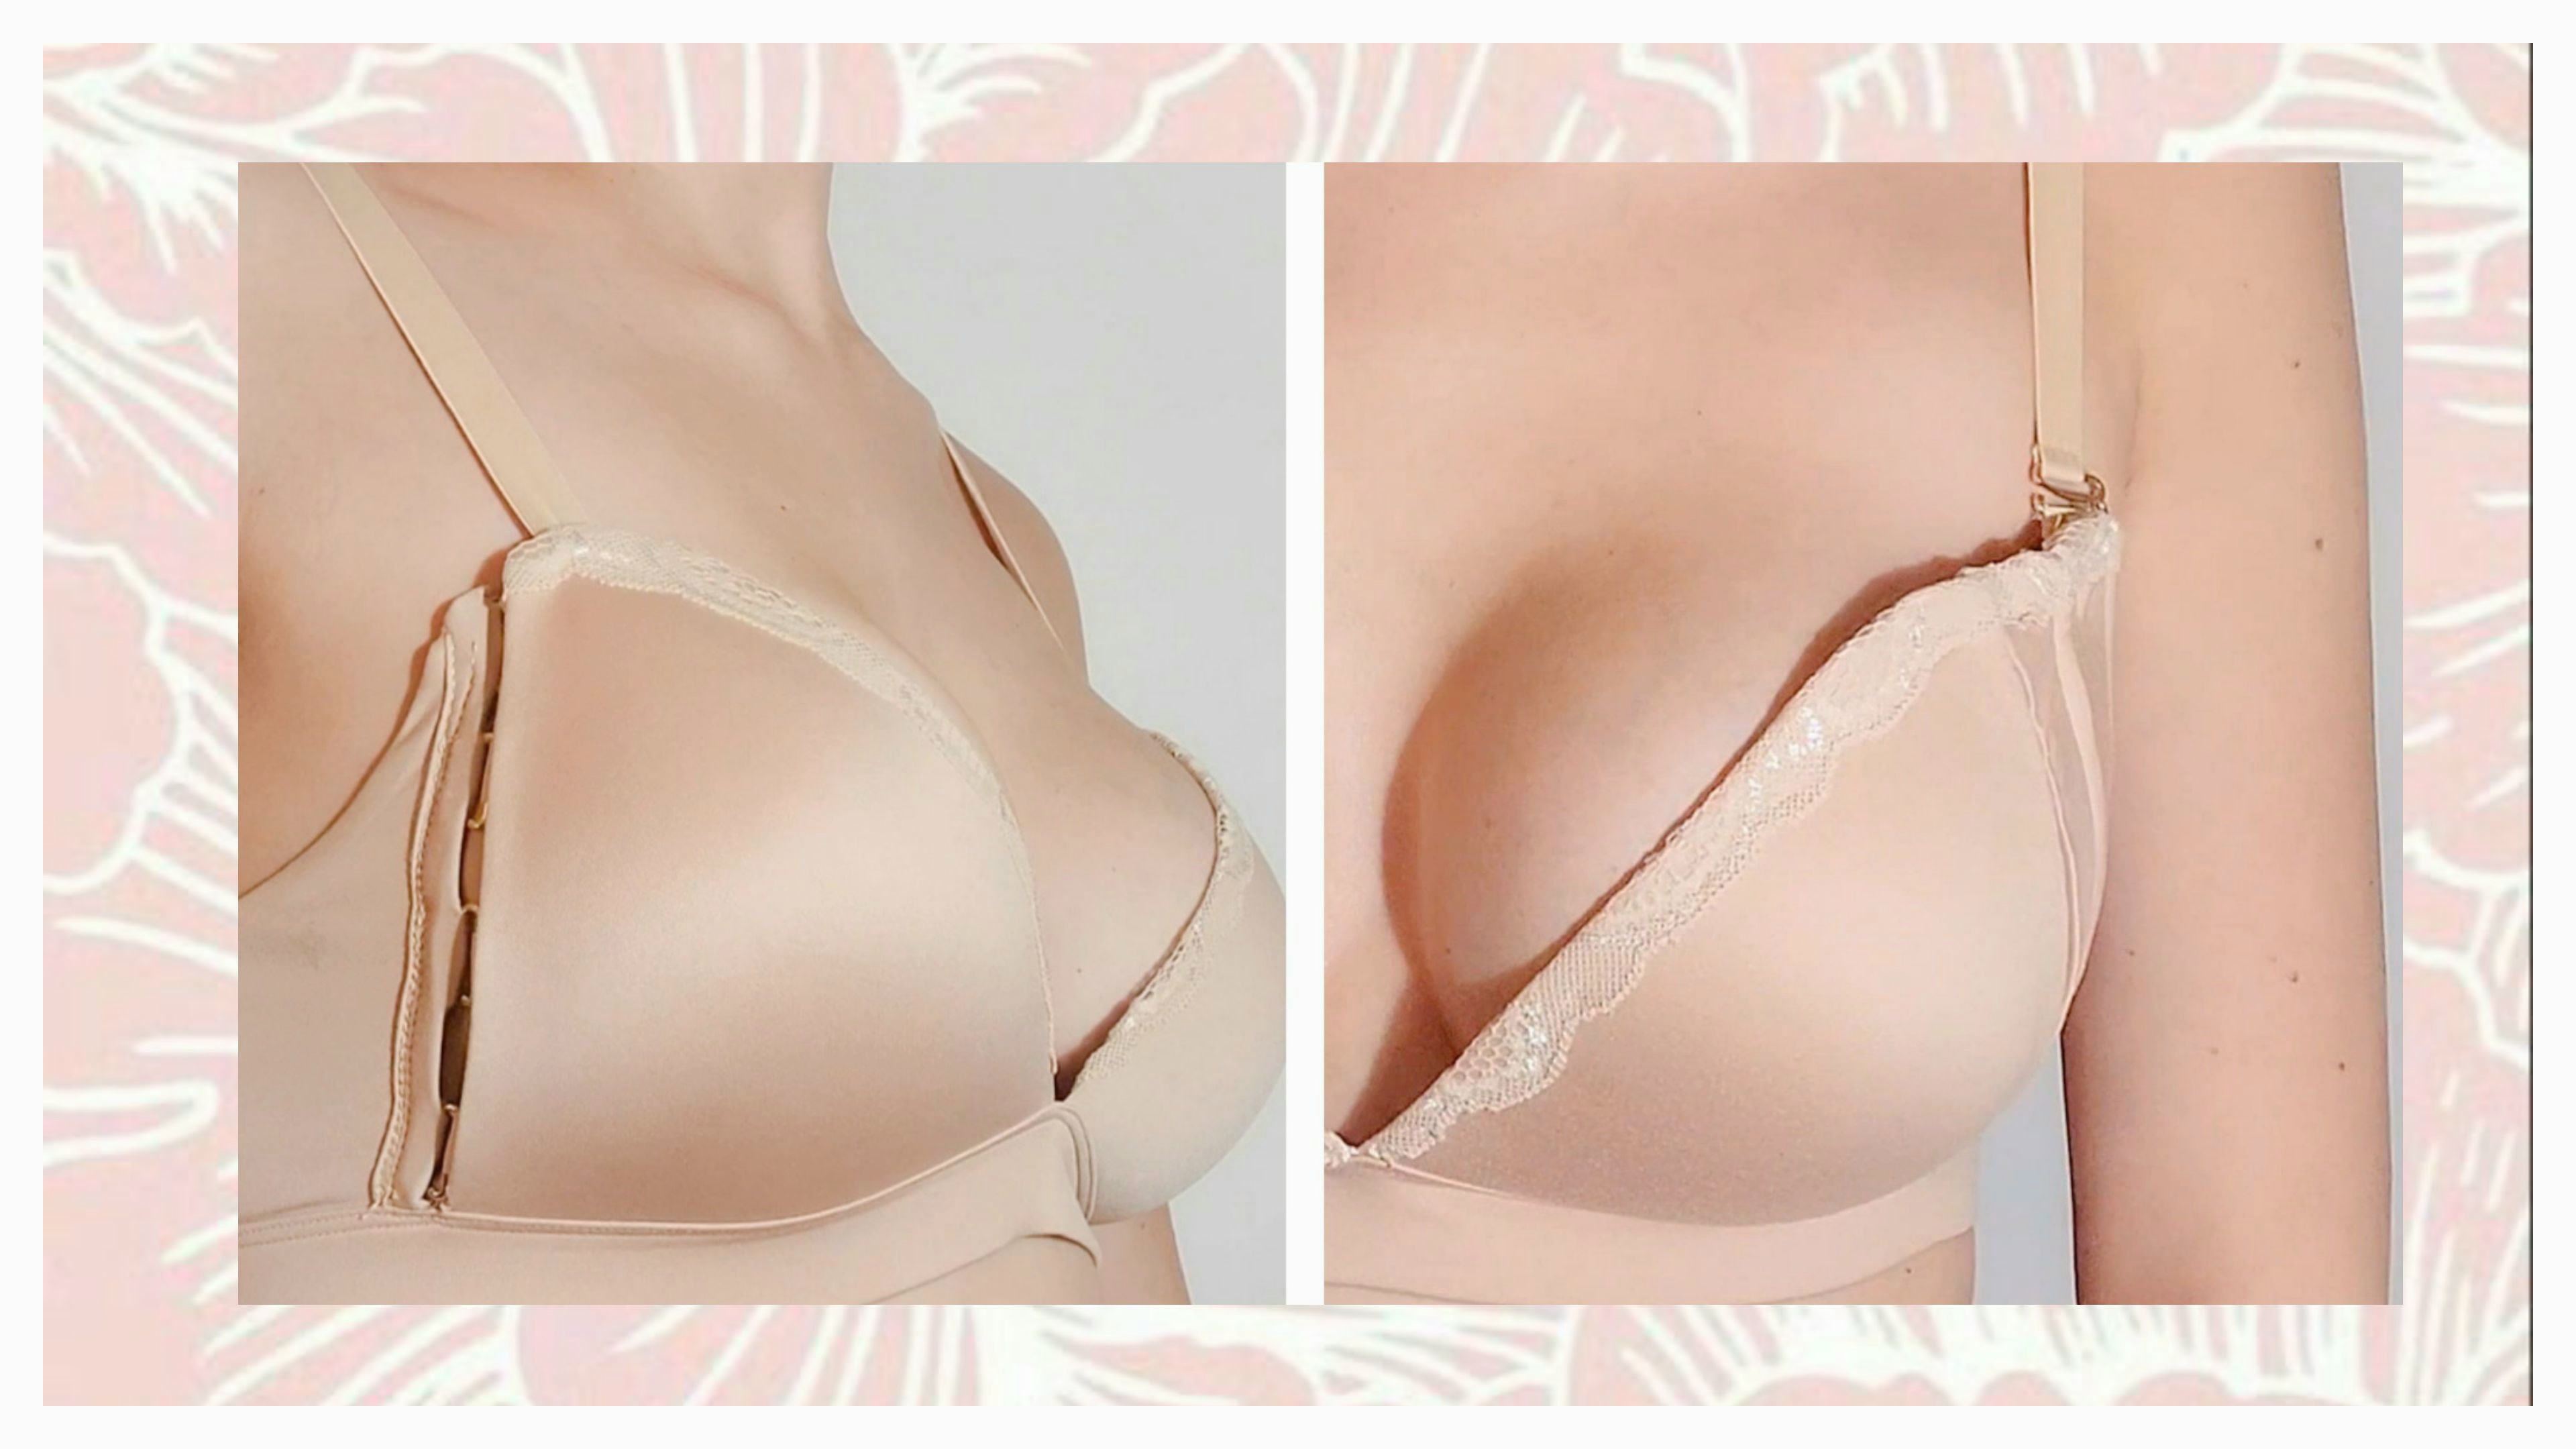 THE FIRST ADJUSTABLE BRA FOR ASYMMETRICAL BREASTS